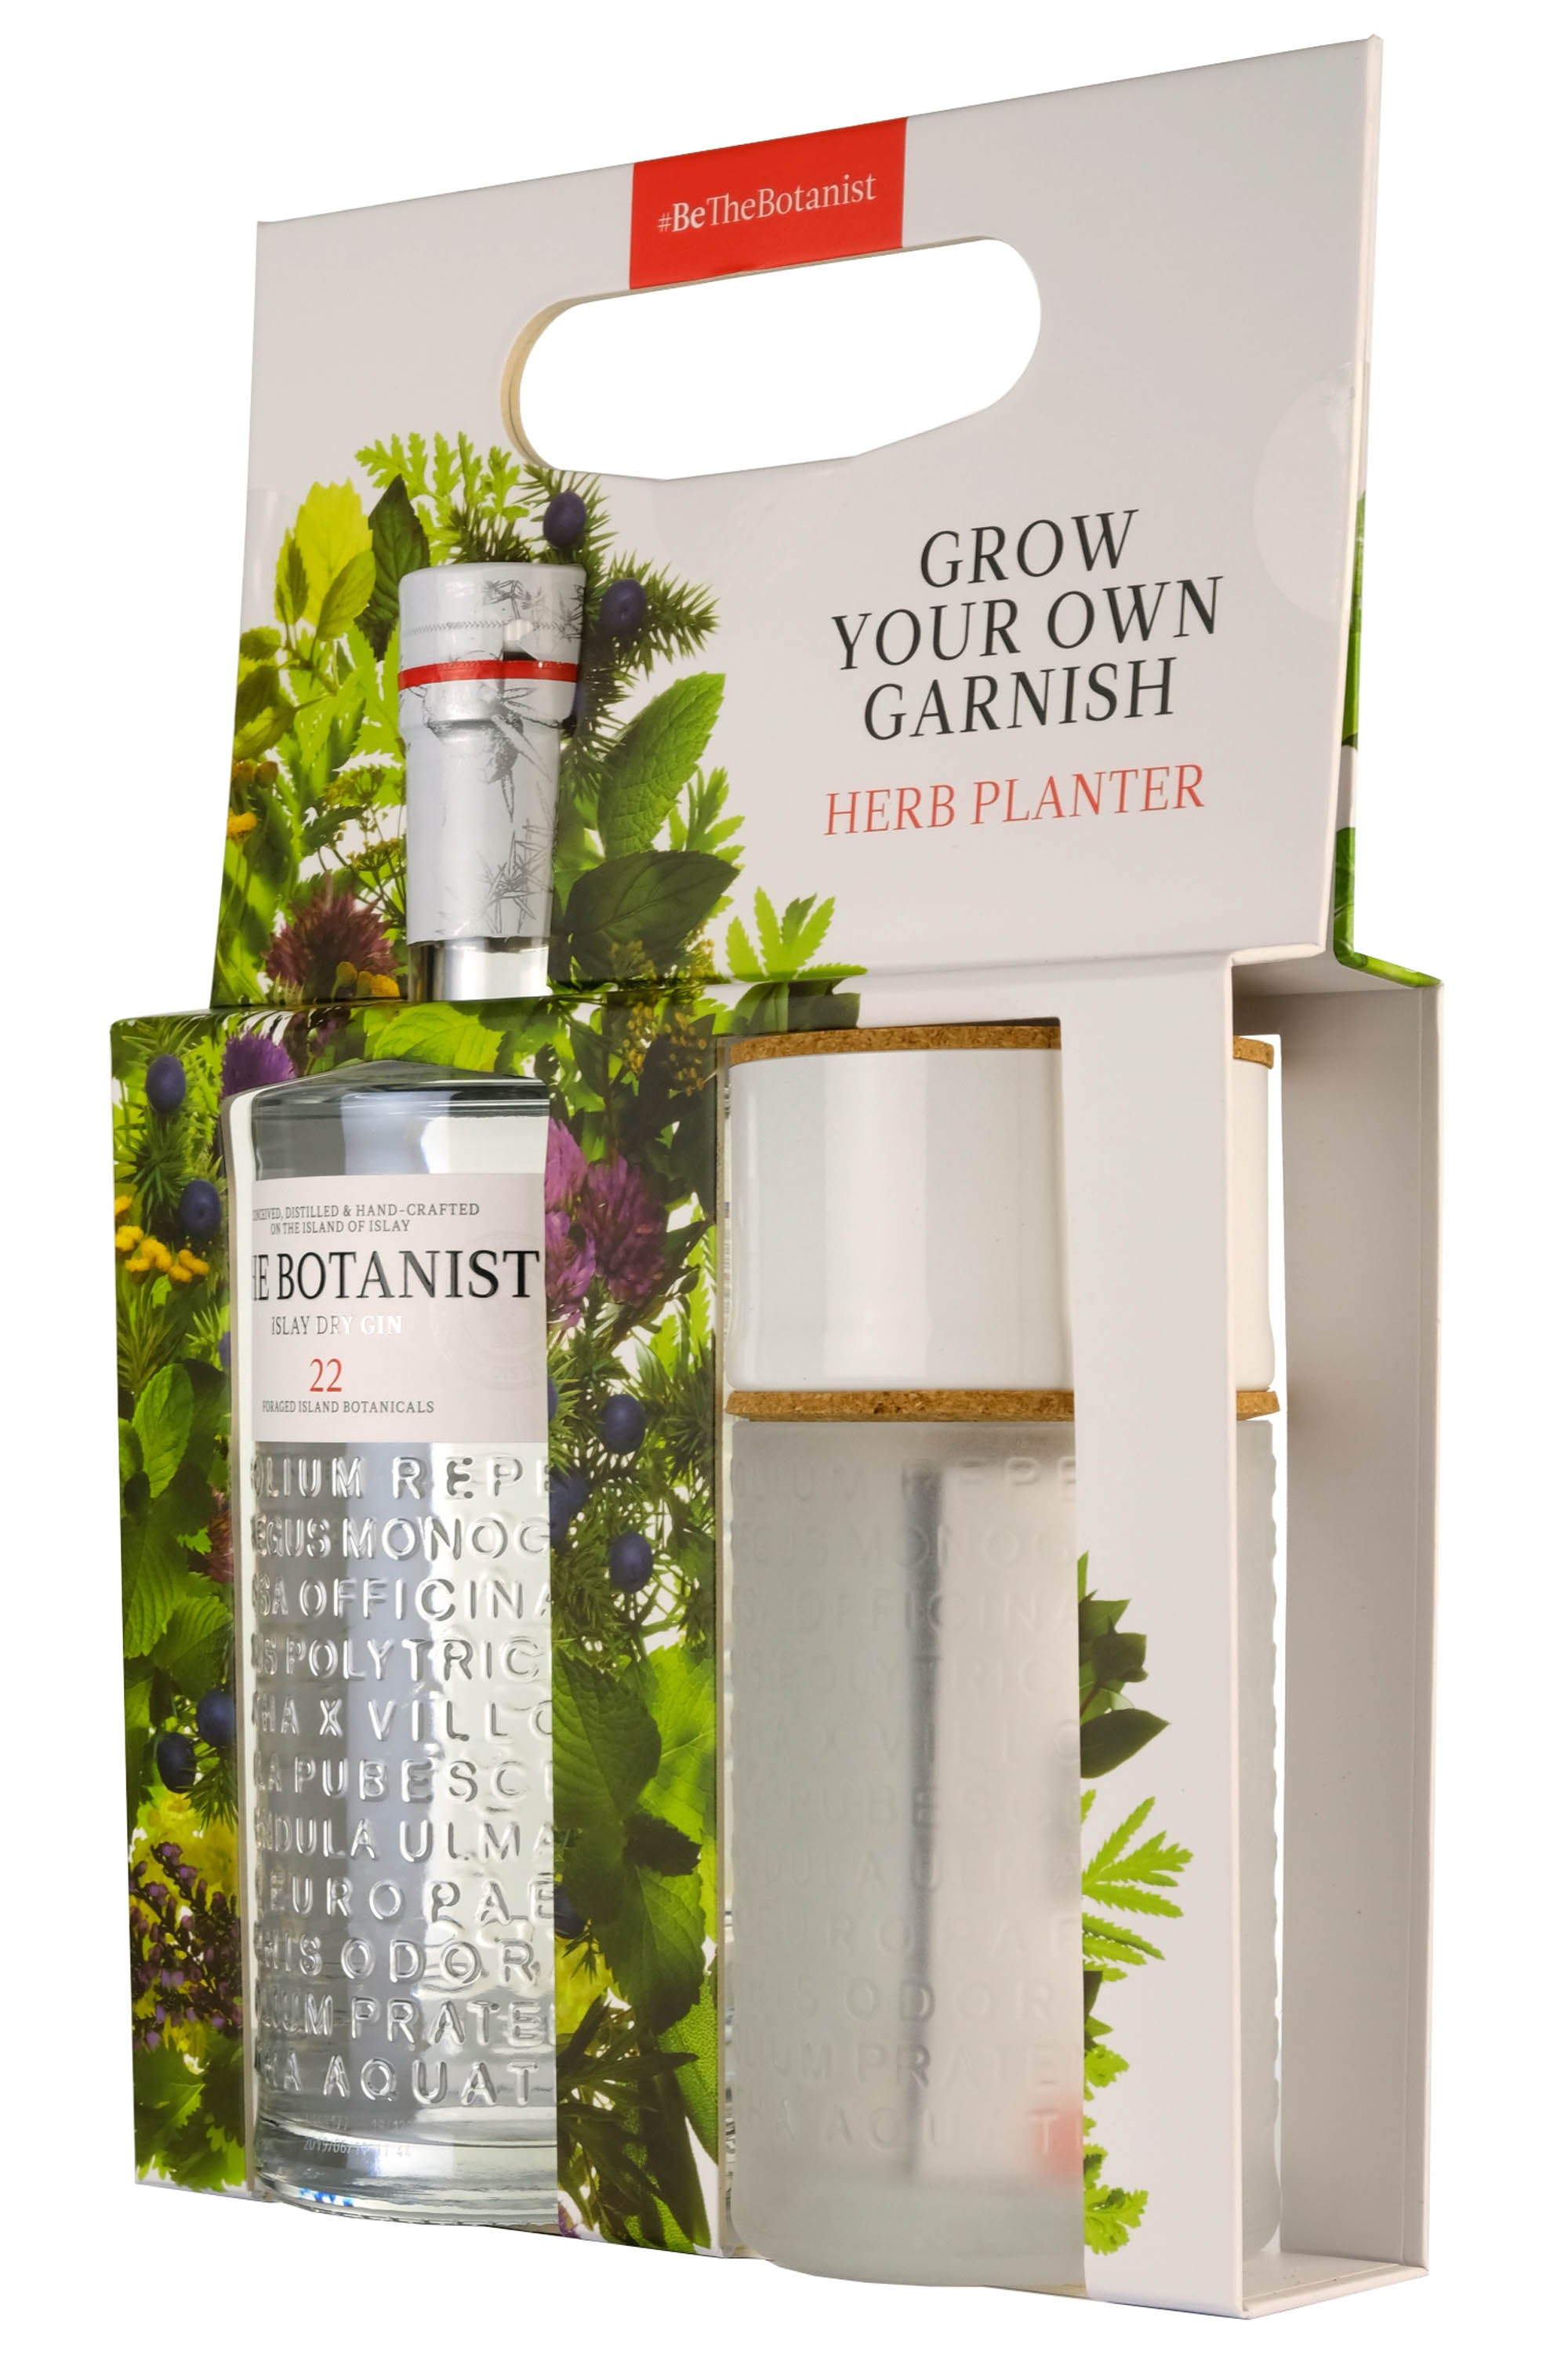 The Botanist Islay Dry Gin | Grow Your Own Garnish Herb Planter Gift Set